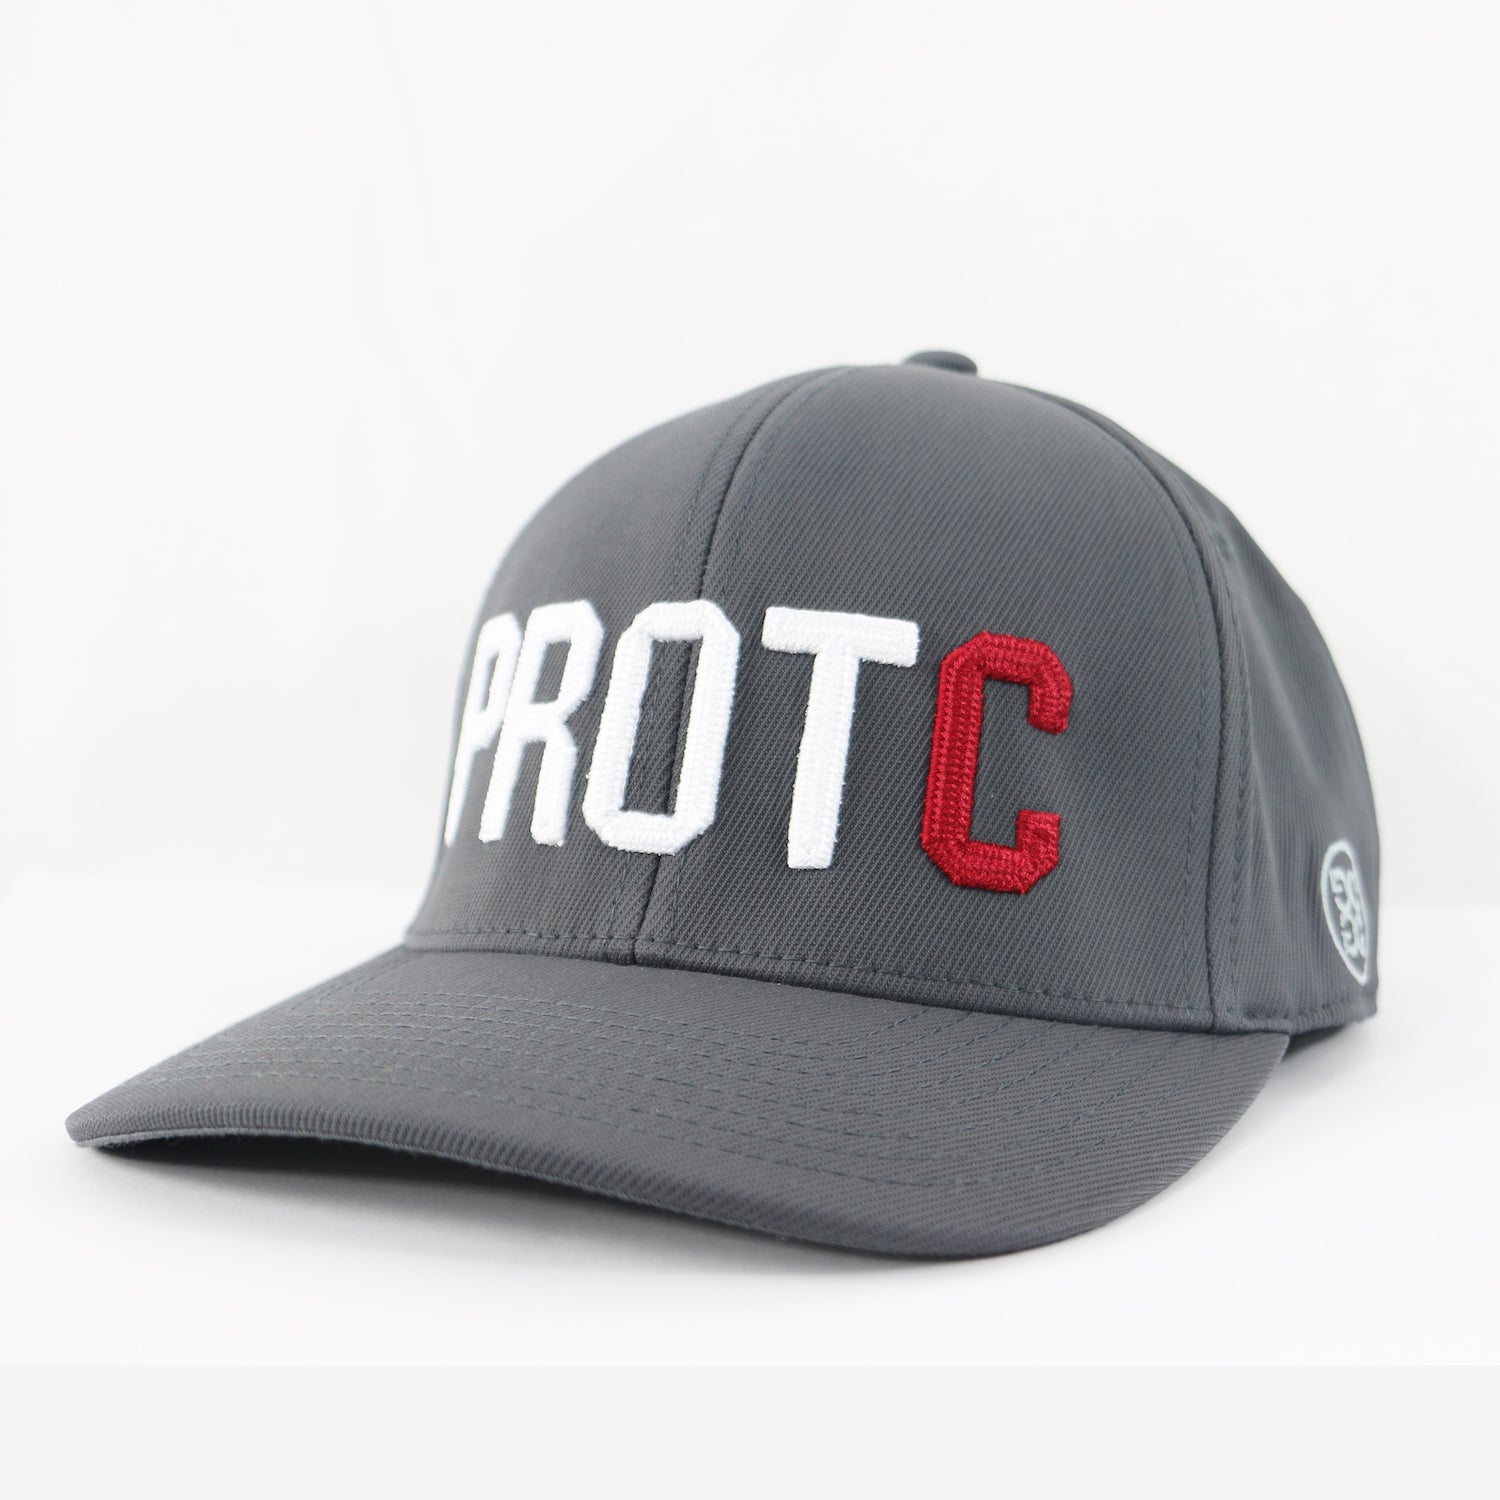 G/FORE×Protoconcept Cap - 7